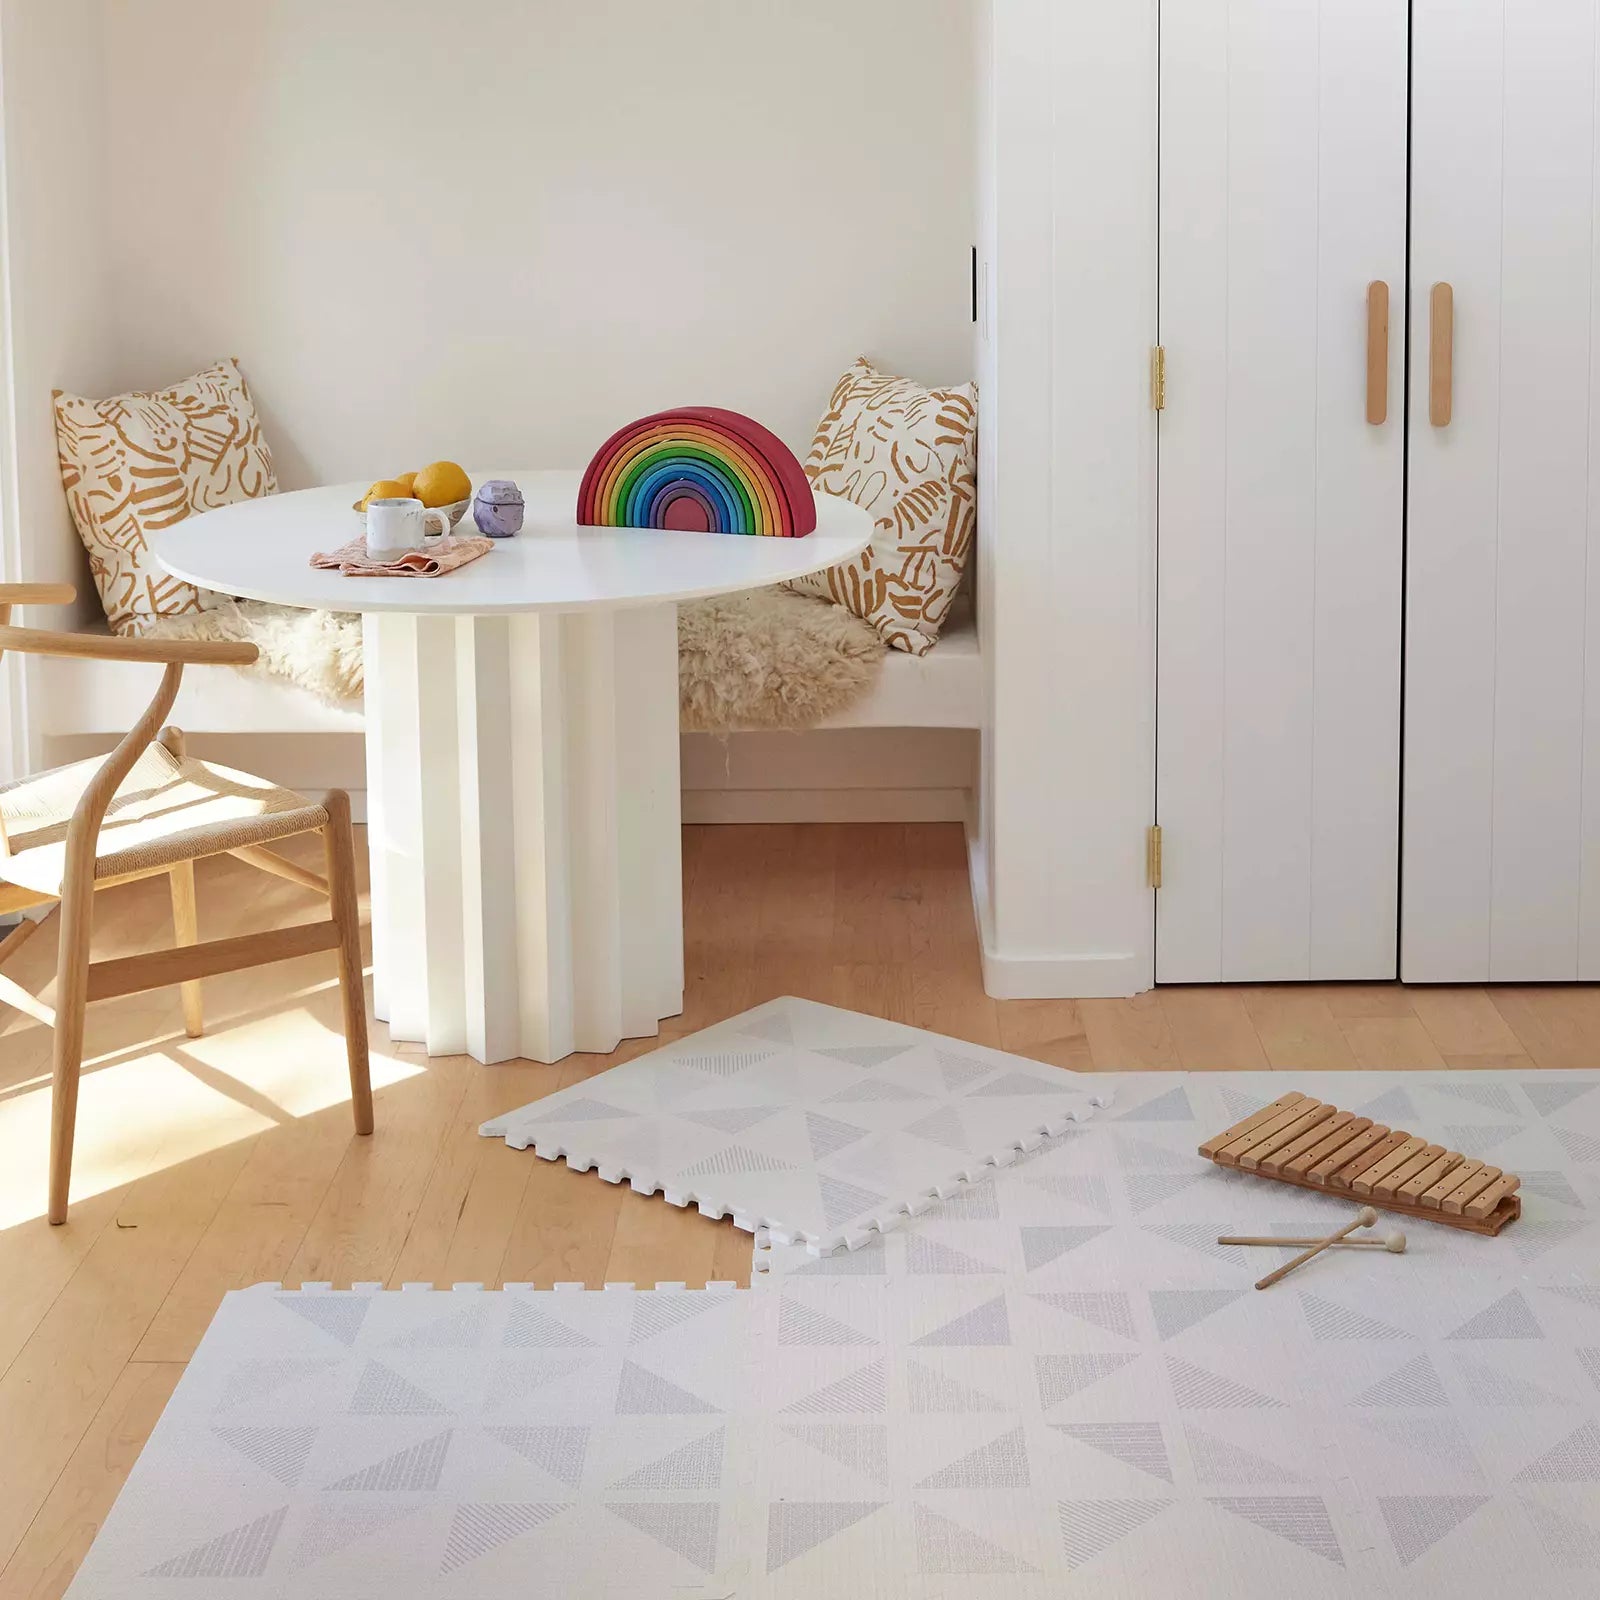 Terrazzo cream geometric play mat shown in play room with 1 tile exposed